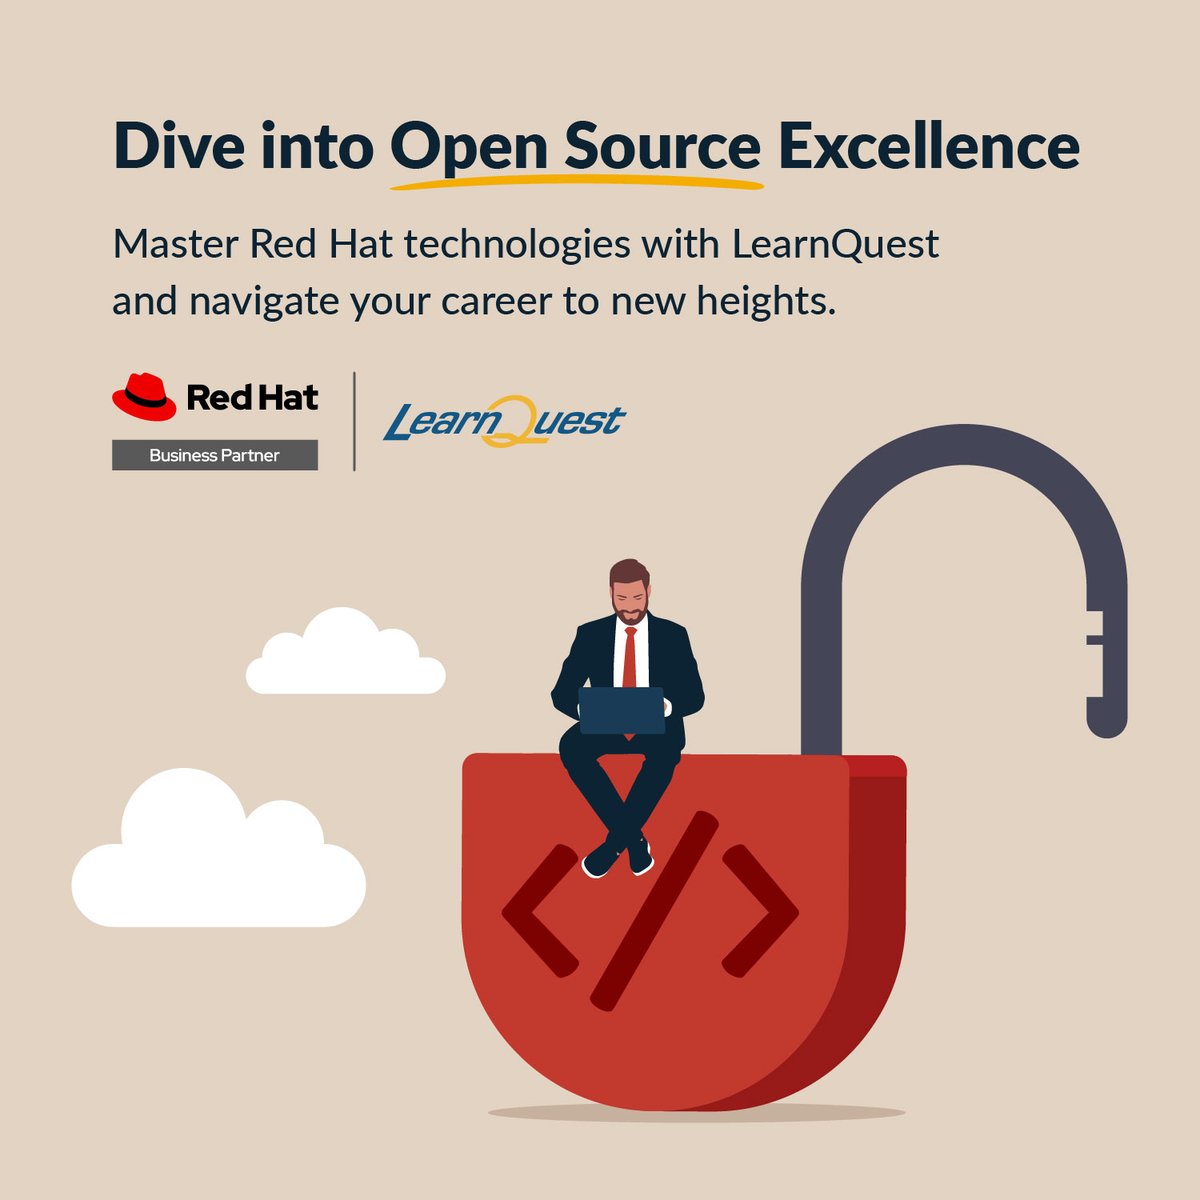 Ride the #OpenSource wave with Red Hat training at LearnQuest! Surf into a sea of opportunities. Catch the wave → bit.ly/3zrATgF

#RedHat #RedHatTraining #OpenSource #ITTraining #LearnQuest